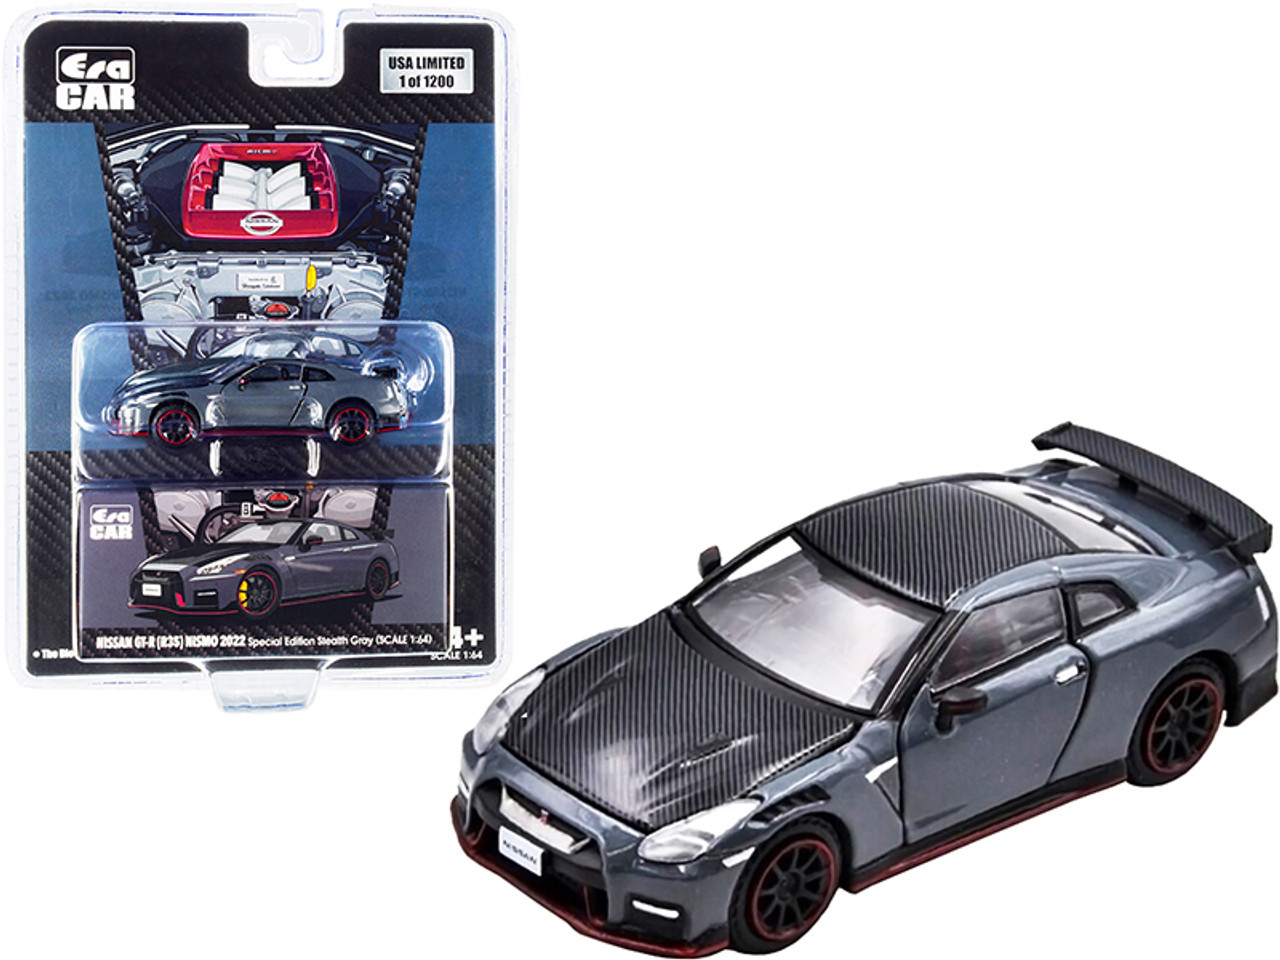 2022 Nissan GT-R (R35) Nismo RHD (Right Hand Drive) Stealth Gray Metallic and Carbon "Special Edition" Limited Edition to 1200 pieces 1/64 Diecast Model Car by Era Car